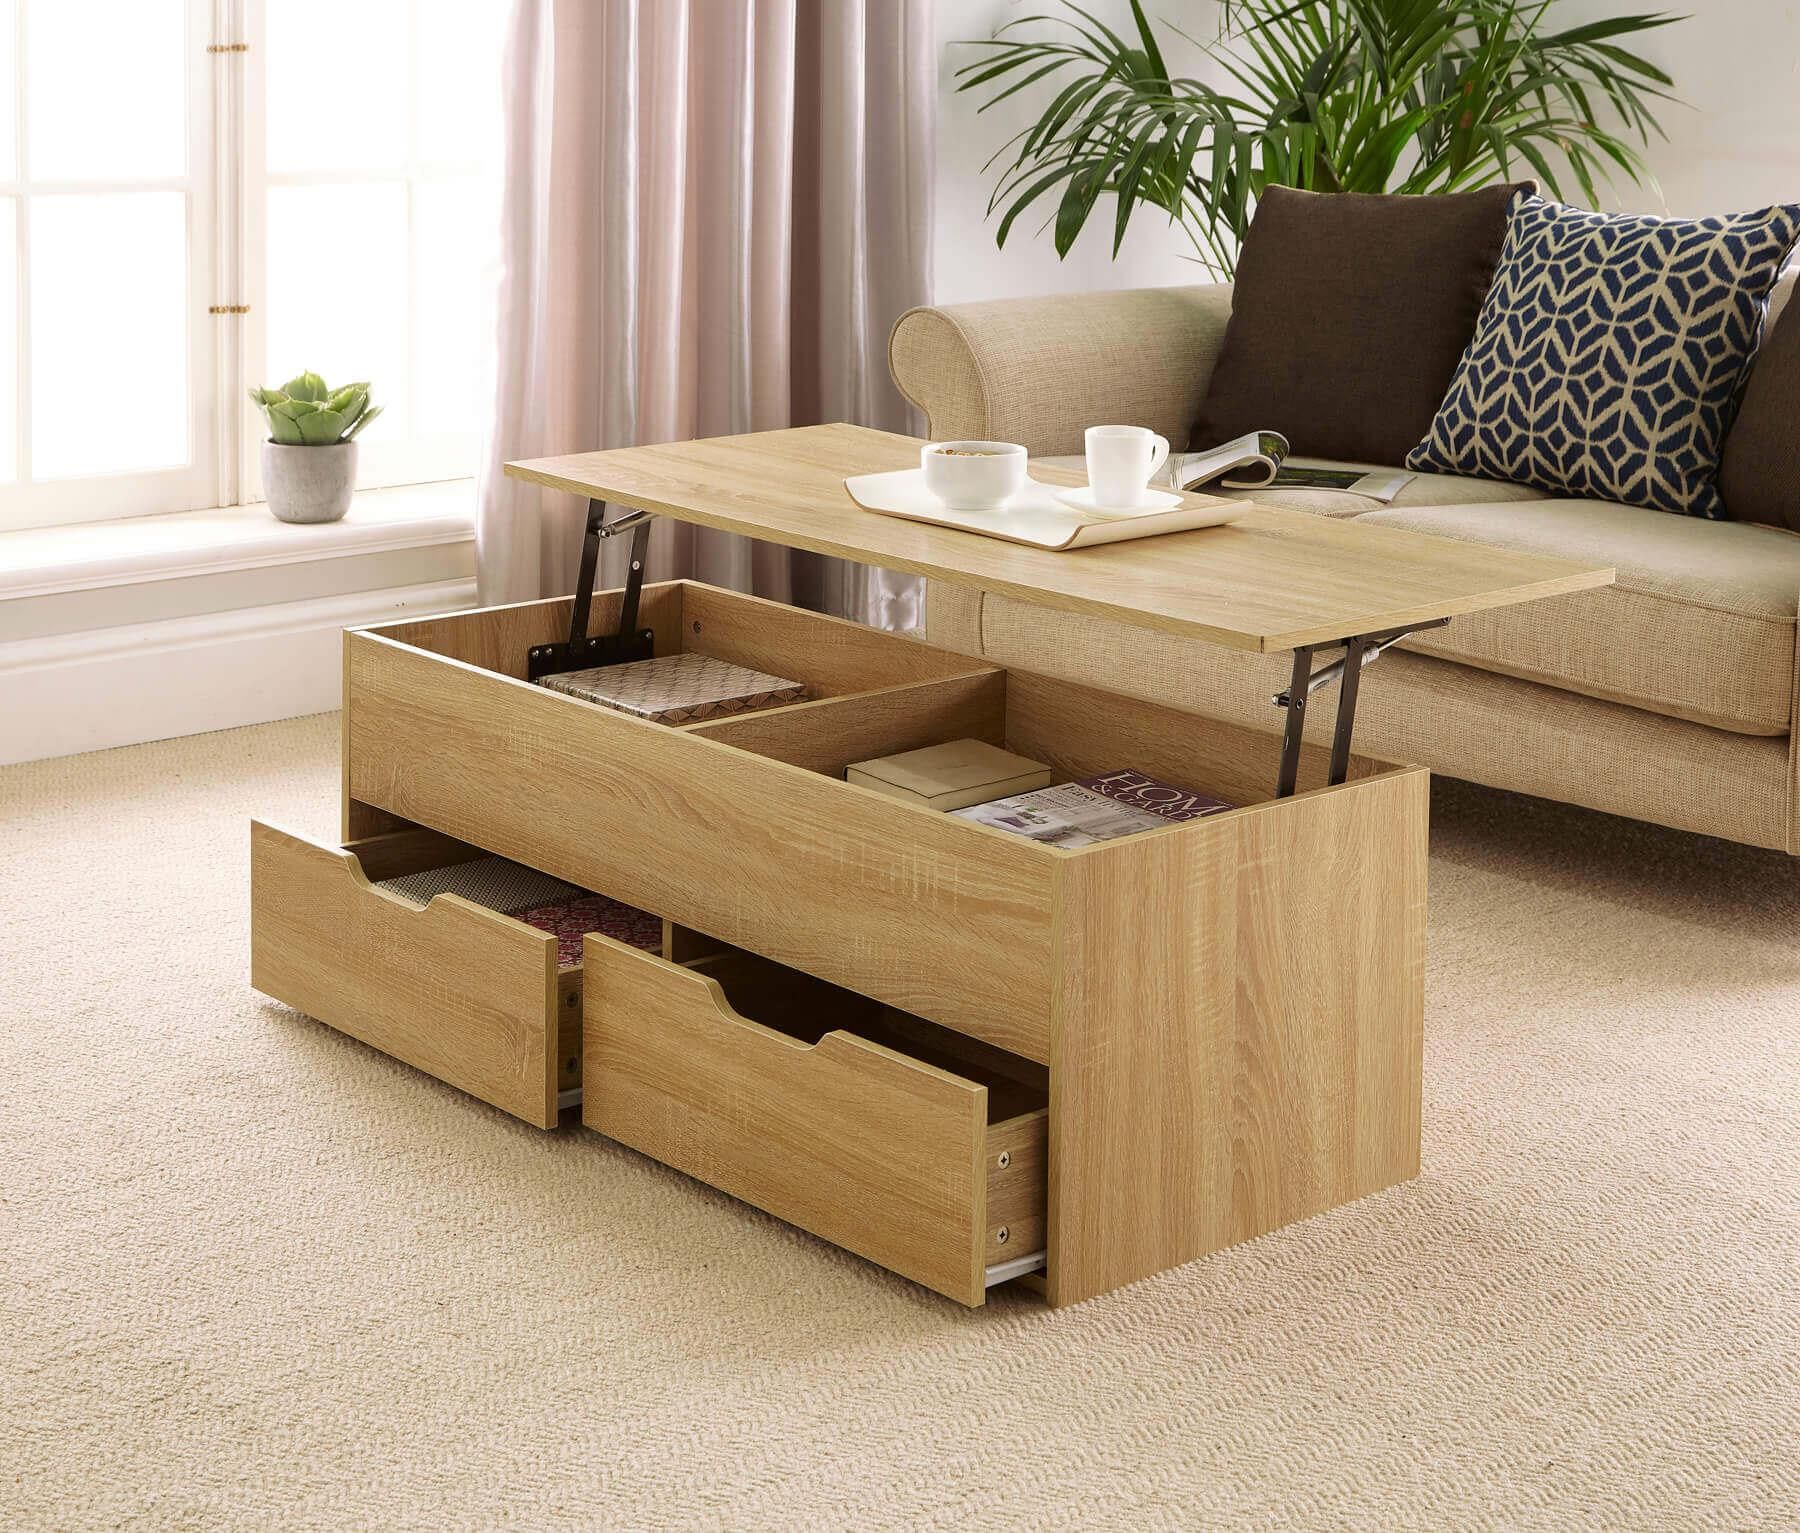 Oak Wooden Coffee Table With Lift Up Top And 2 Large Storage Drawers Pertaining To Wood Lift Top Coffee Tables (Gallery 20 of 20)